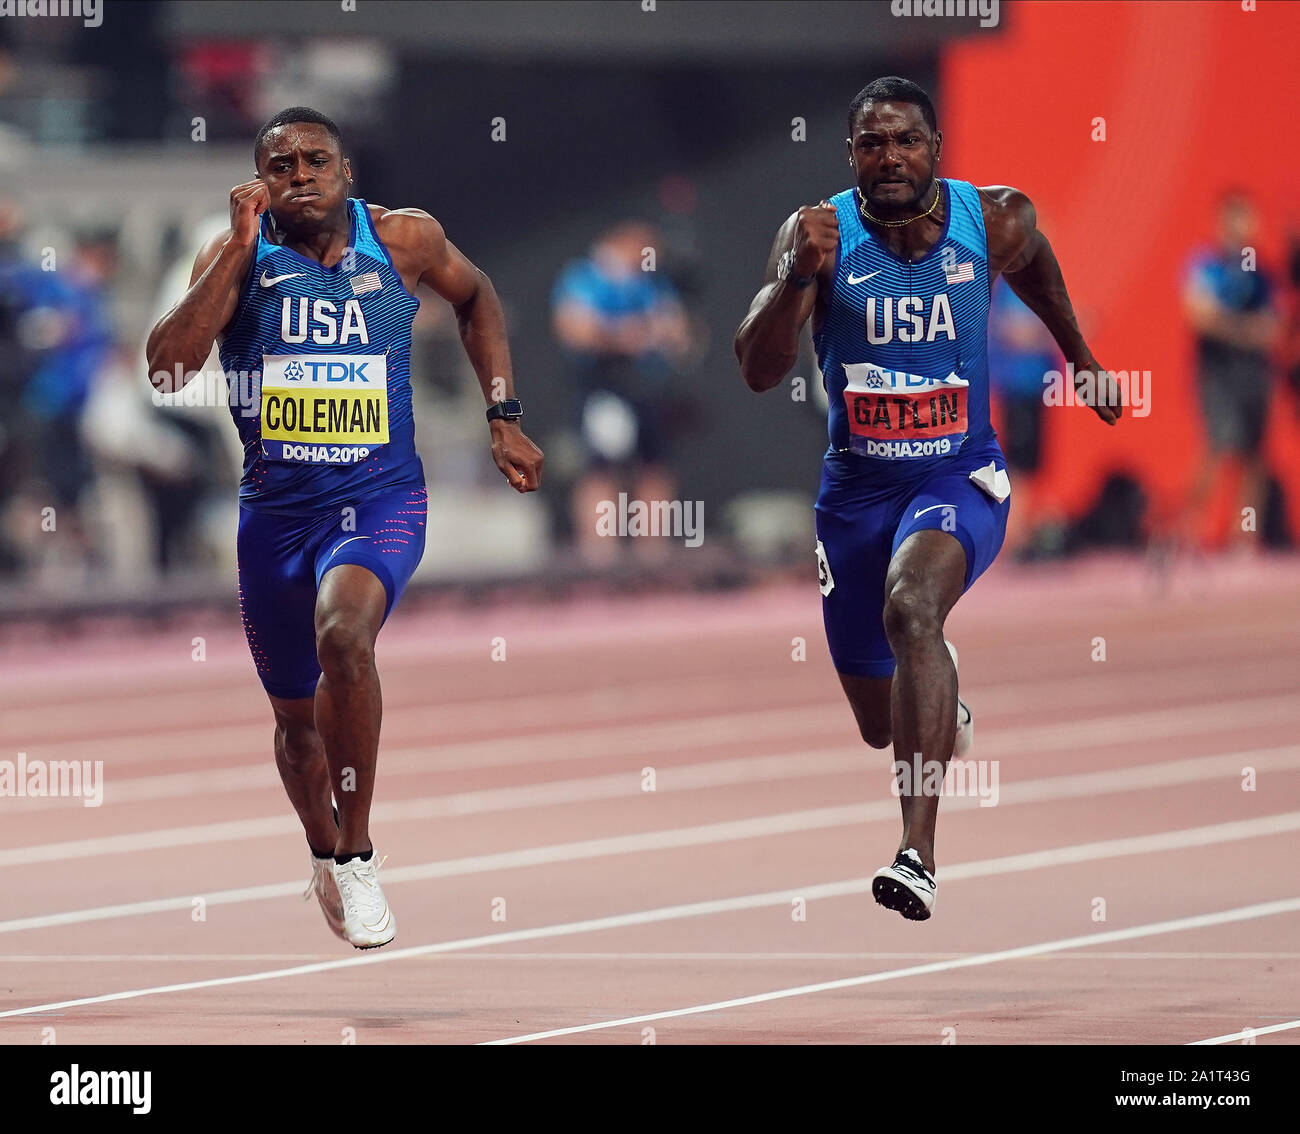 Doha, Qatar. 28th Sep, 2019. Christian Coleman of United States and Justin Gatlin of United States competing in the 100 meter for men during the 17th IAAF World Athletics Championships at the Khalifa Stadium in Doha, Qatar. Ulrik Pedersen/CSM/Alamy Live News Stock Photo